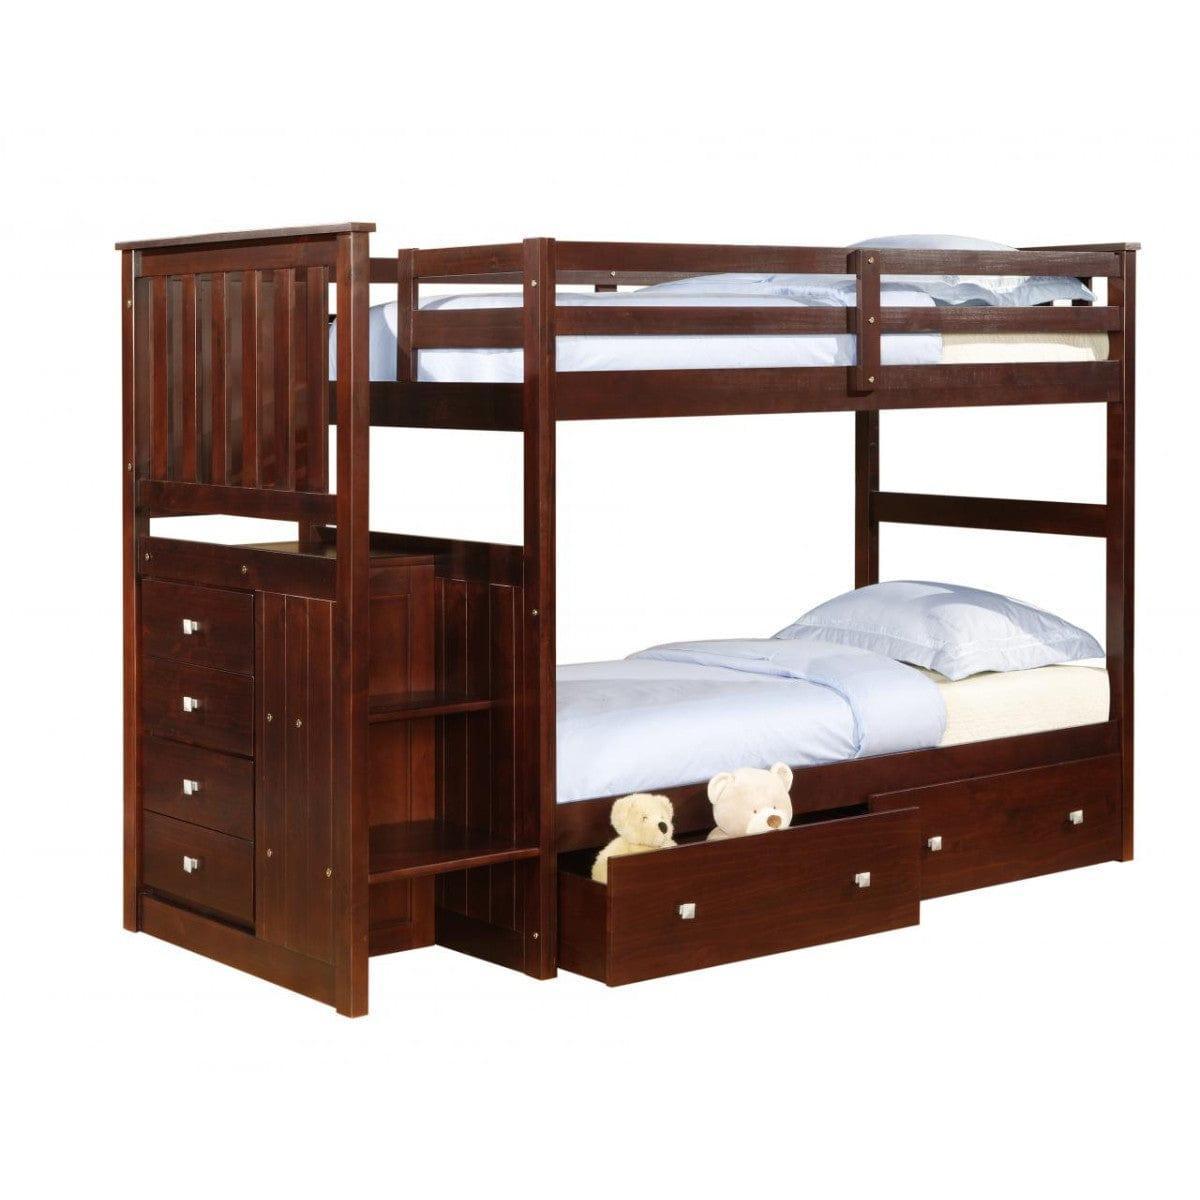 Donco Twin/Full Mission Stairway Bunk Bed With Ext Kit With Dual Underbed Drawers Cappuccino Finish 820-TTCP_800E-CP_505-CP - Bedroom Depot USA